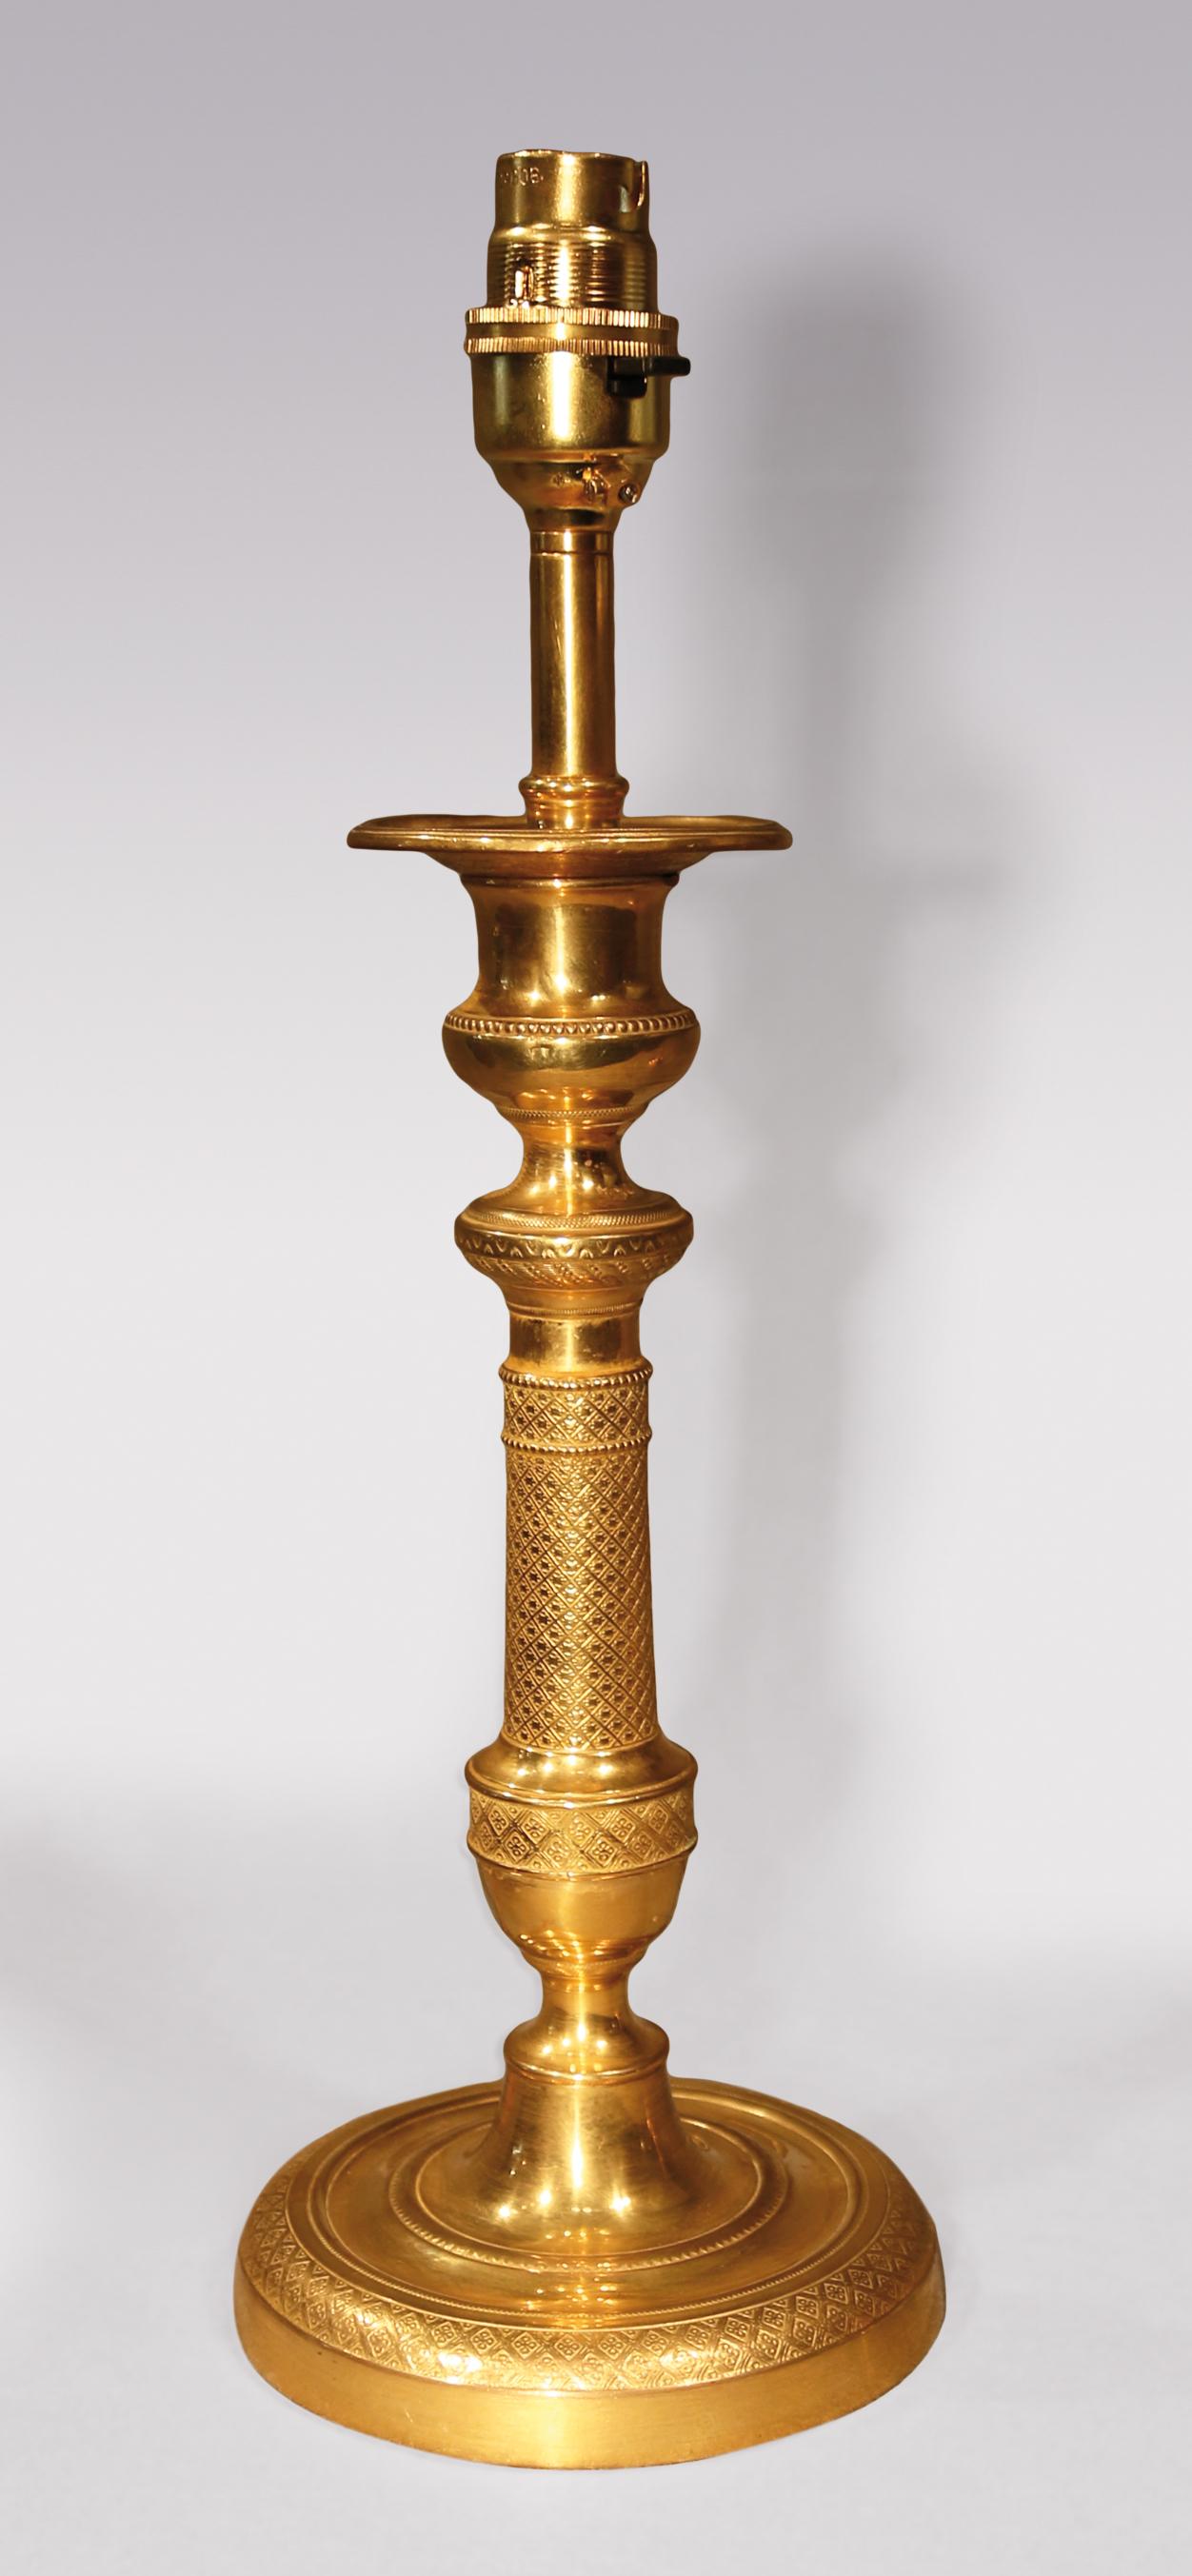 A pair of early 19th century ormolu candlesticks, having urn-shaped nozzles above vase and columns stems ending on circular bases. (Now converted to lamps). Measurements with shade H 18.5